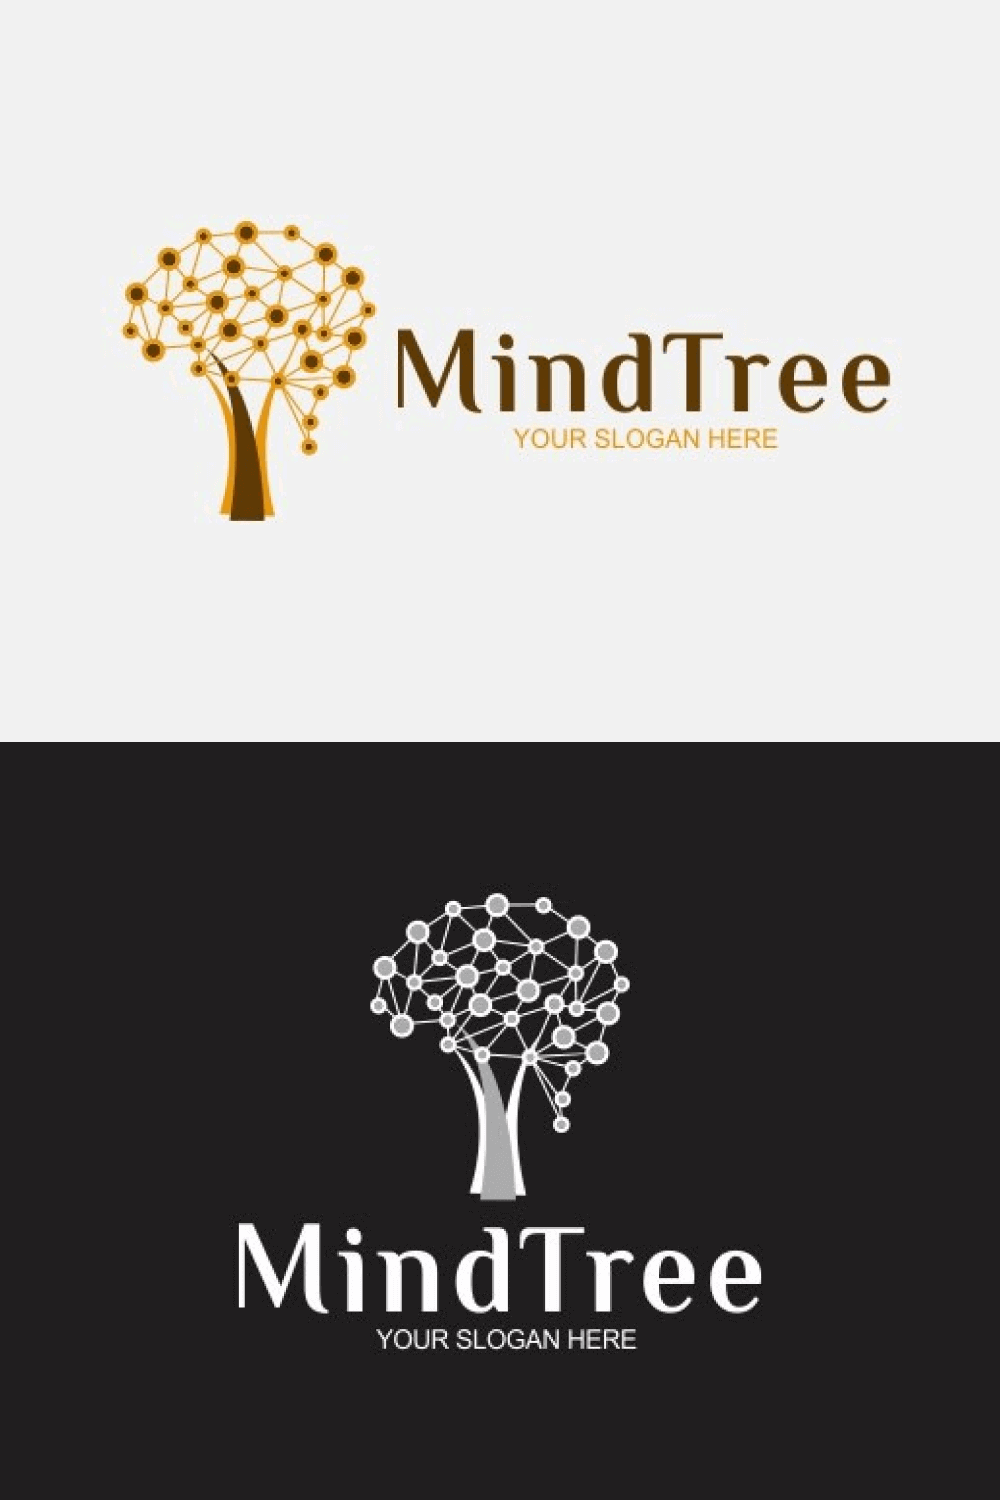 Mind Tree on White and Black Background.